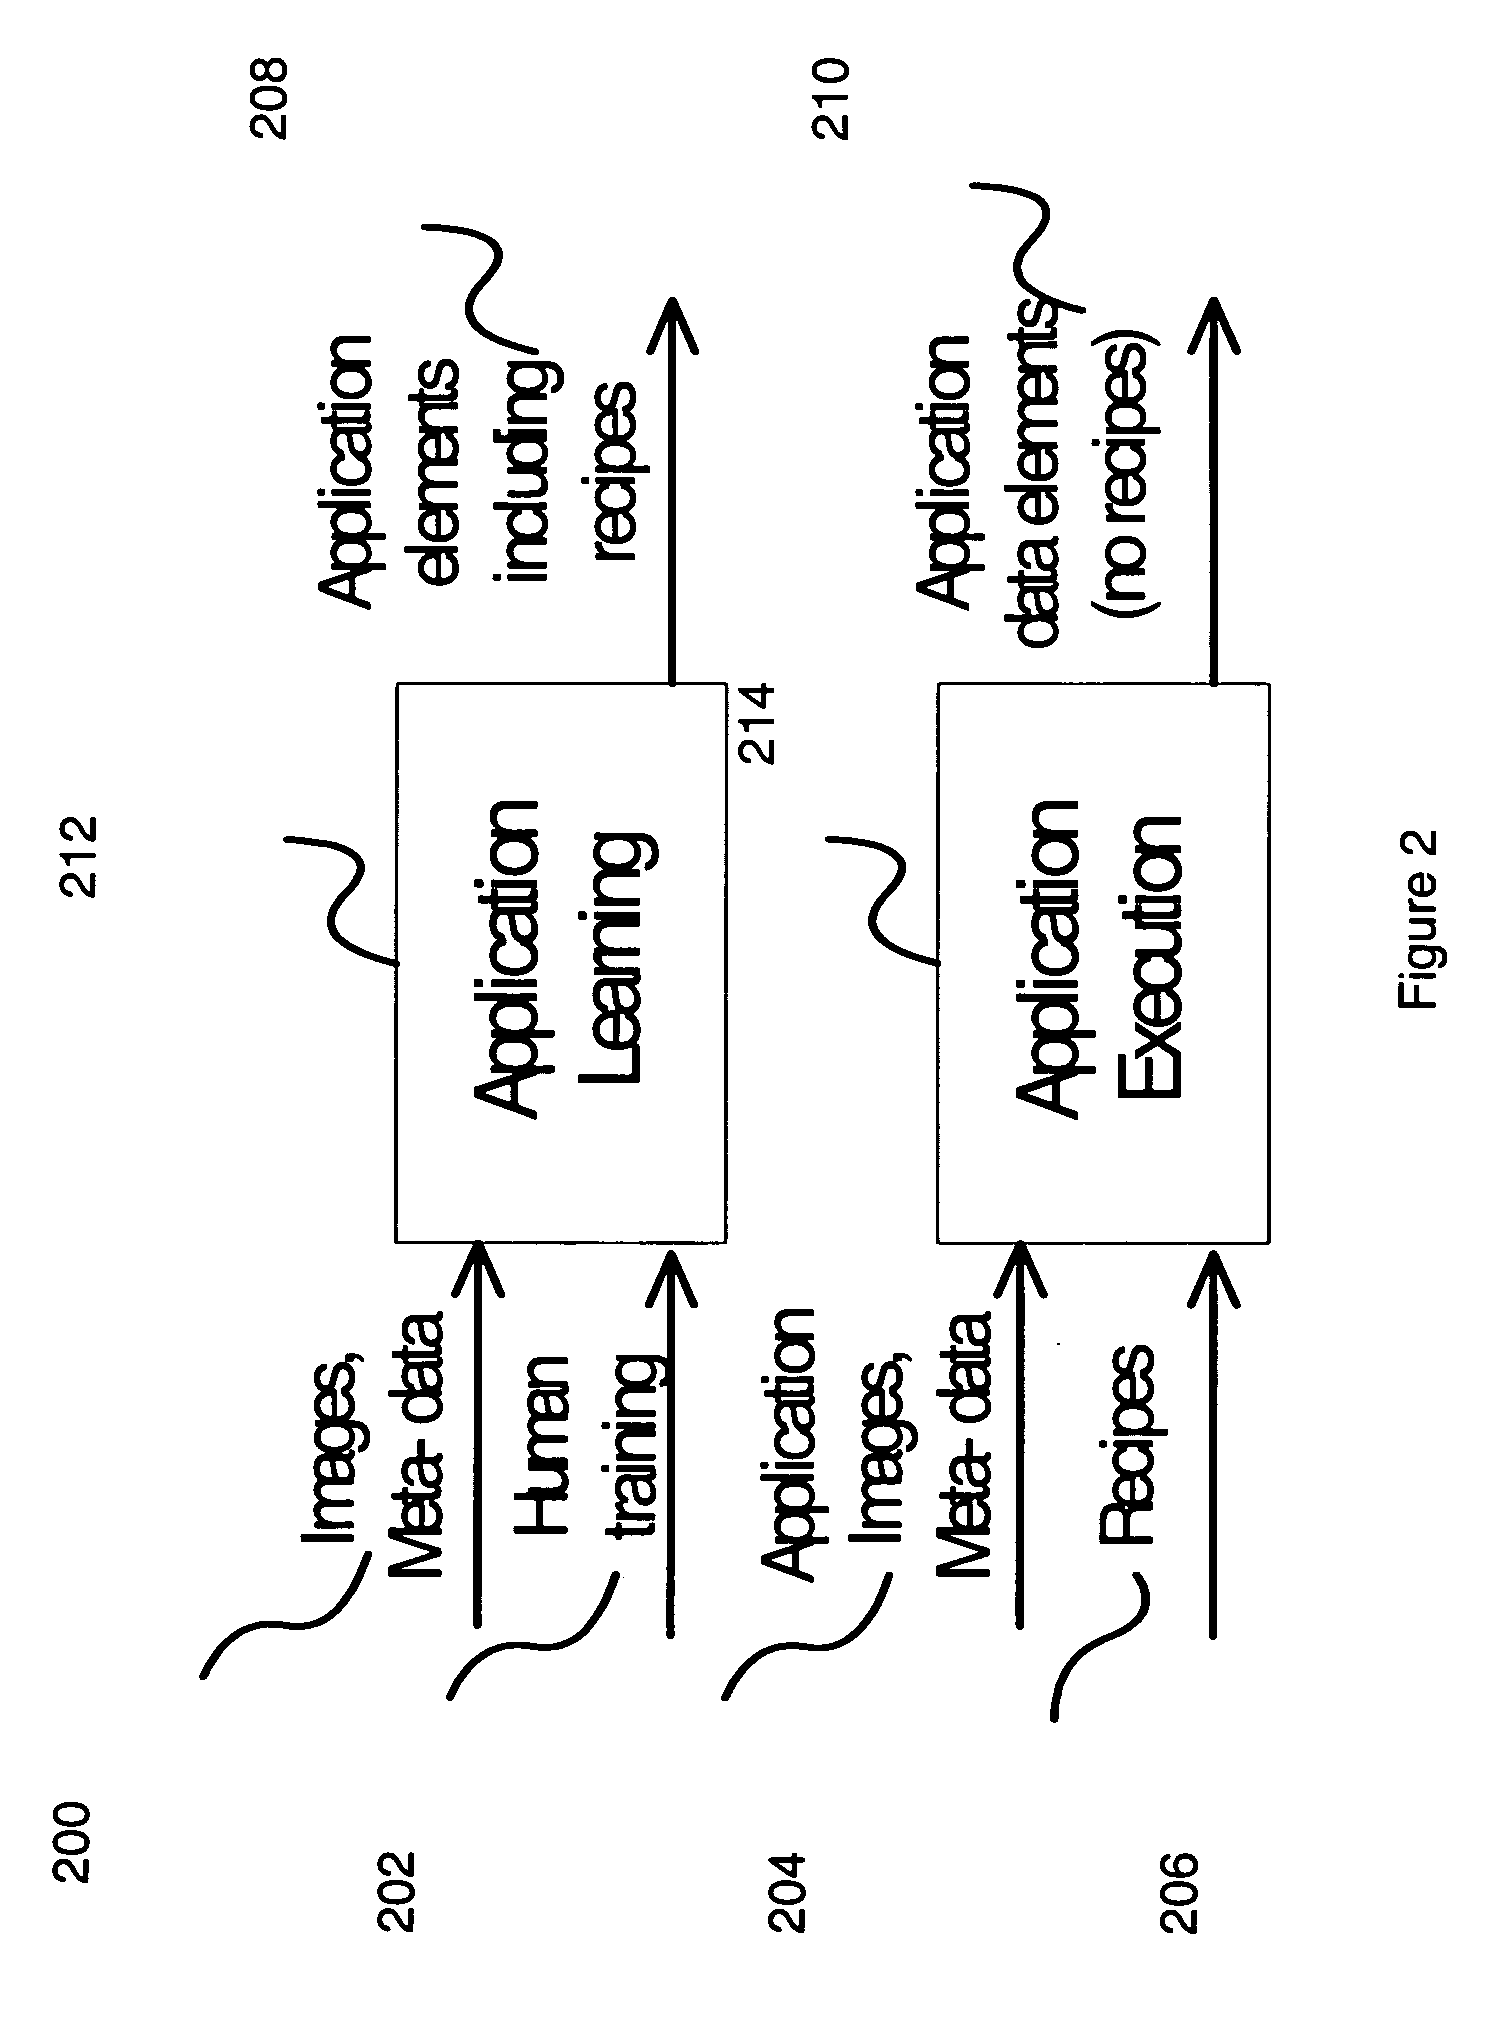 Integrated human-computer interface for image recognition